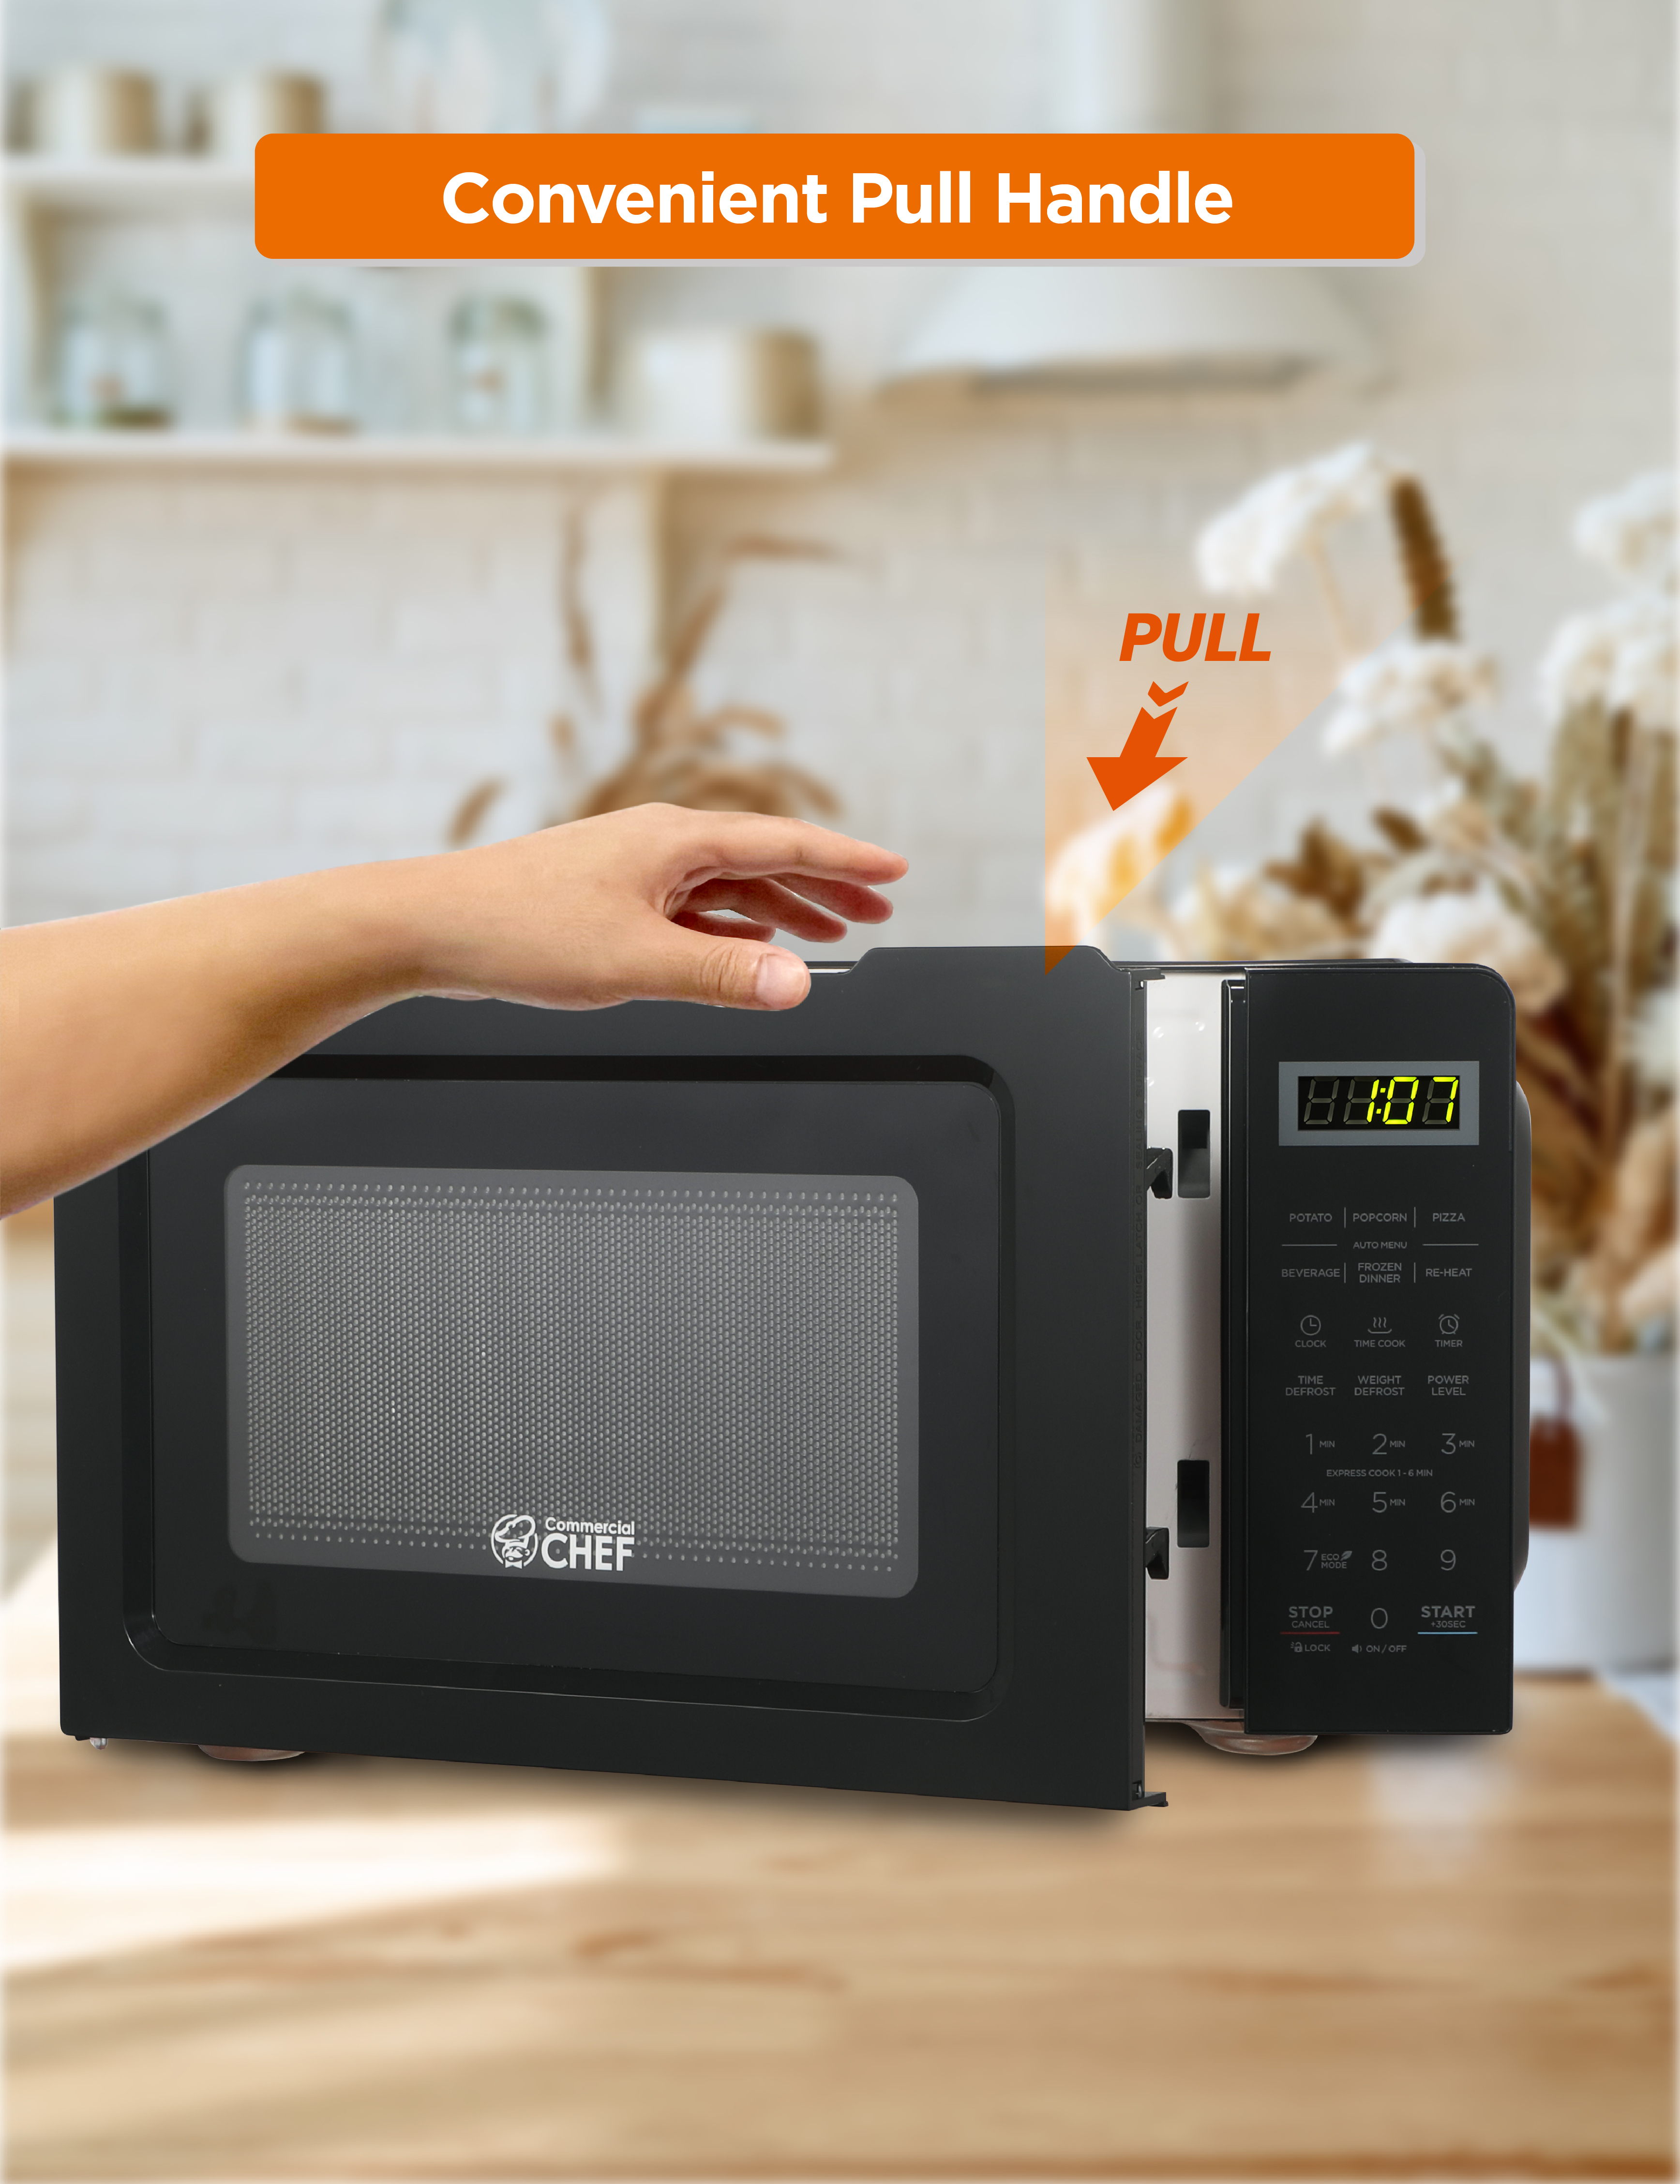 Commercial Chef CHM770B 0.7 Cubic Feet Microwave Oven, 700 Watt, Stainless Steel Front with Black Cabinet - image 2 of 7